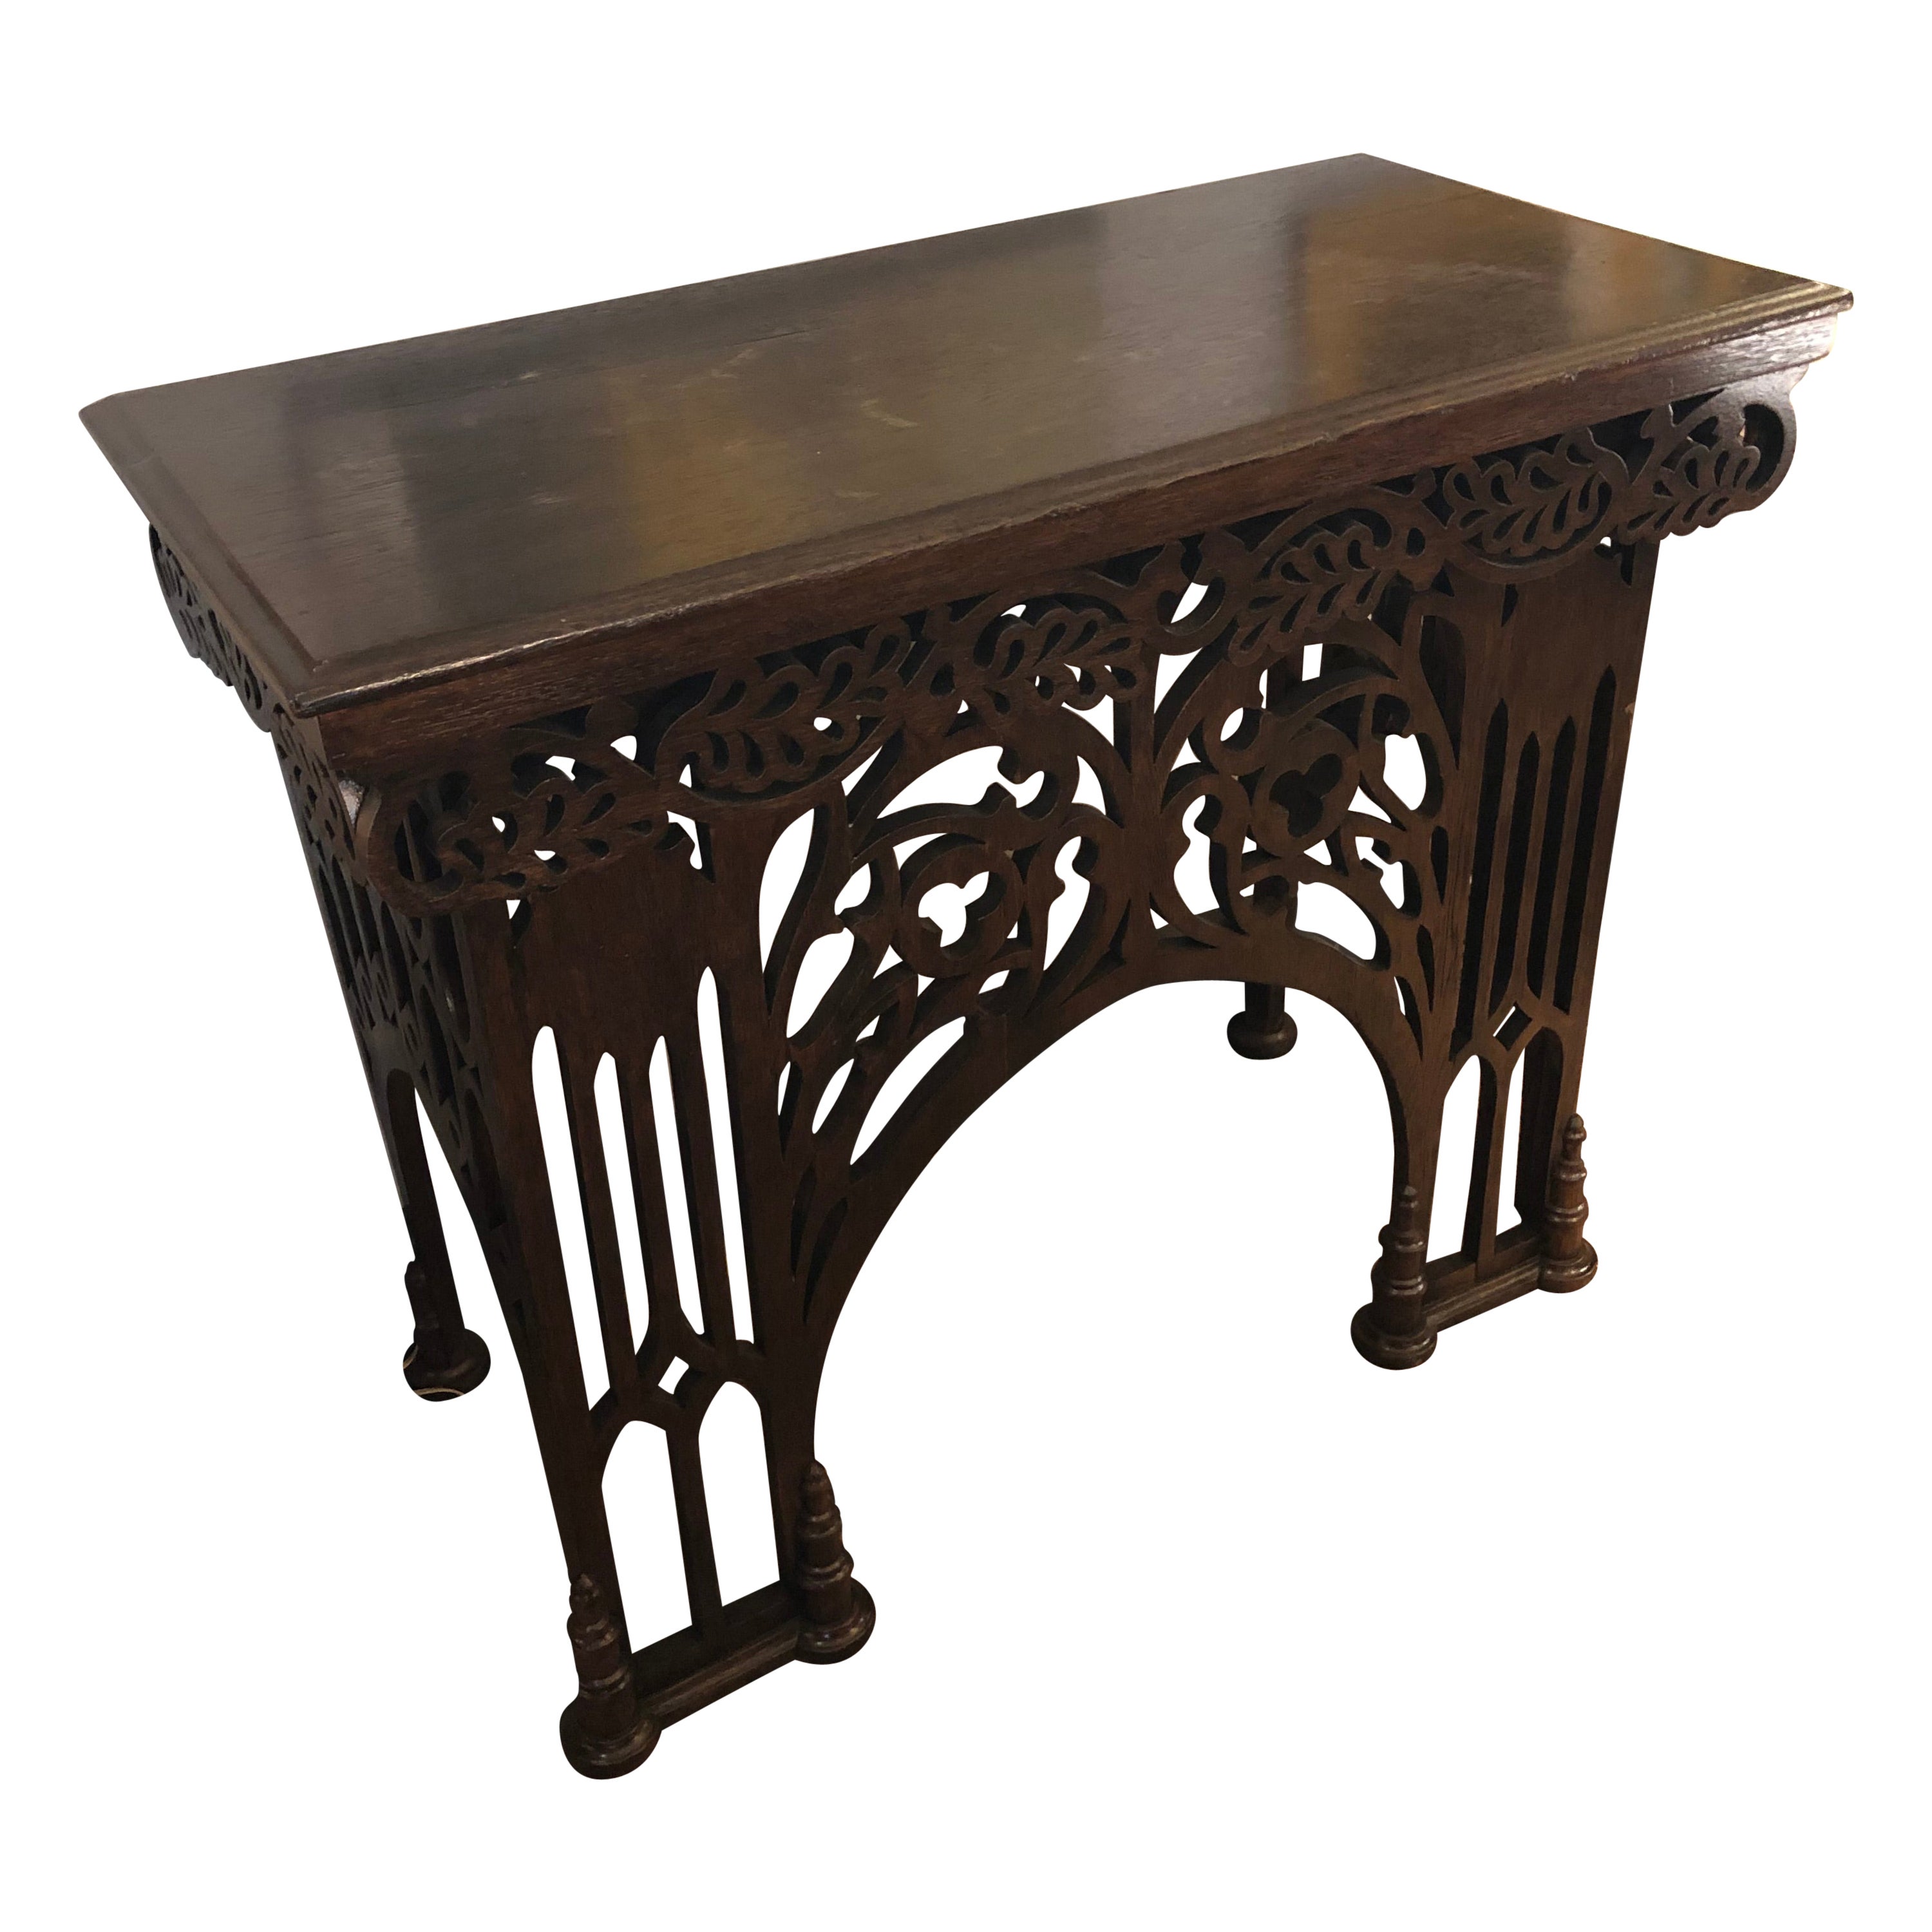 Rare English Gothic Revival Console For Sale